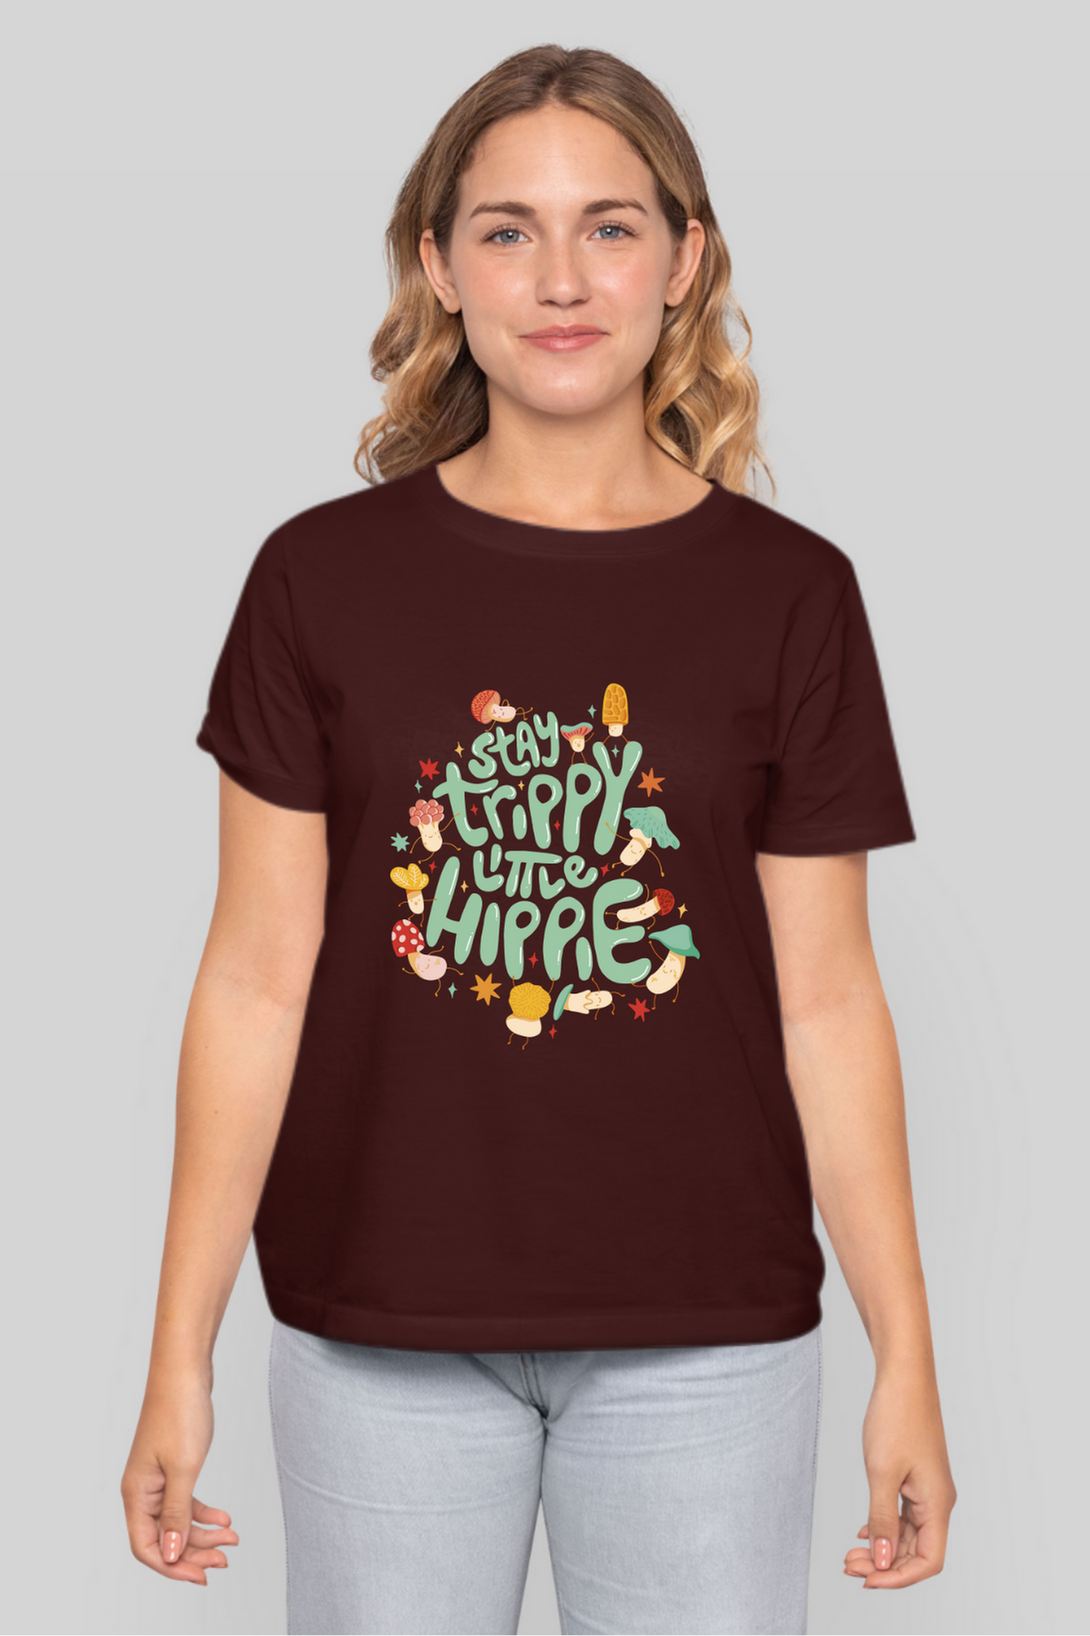 Stay Trippy Little Hippie Printed T-Shirt For Women - WowWaves - 11